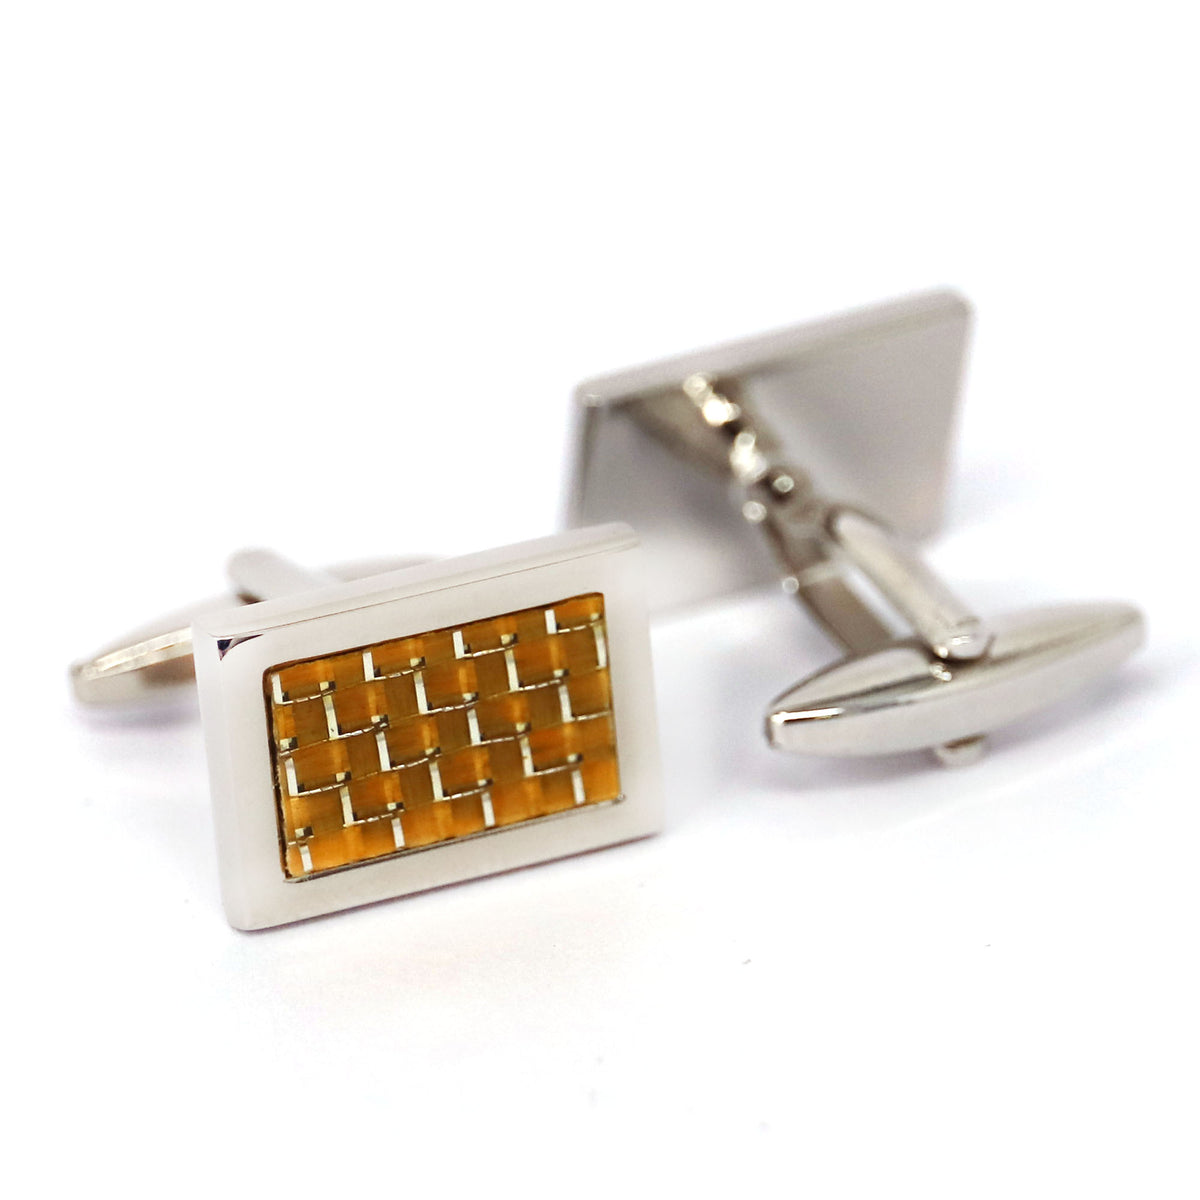 Carbon Fiber Yellow Rectangle Cufflinks in Silver outline